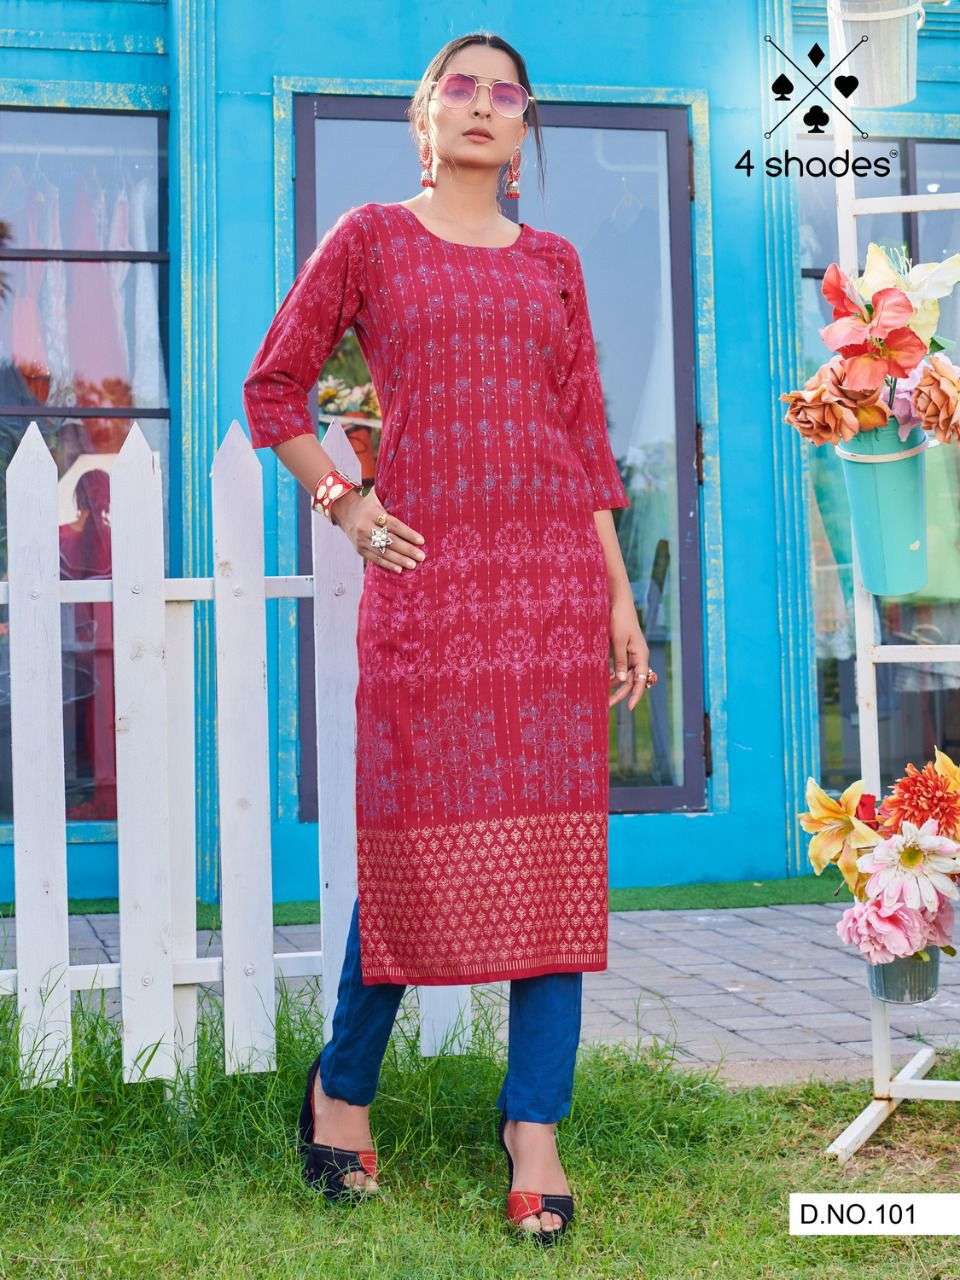 SIMPLE DIMPLE BY 4 SHADES 101 TO 108 SERIES DESIGNER STYLISH FANCY COLORFUL BEAUTIFUL PARTY WEAR & ETHNIC WEAR COLLECTION RAYON SLUB WITH WORK KURTIS AT WHOLESALE PRICE